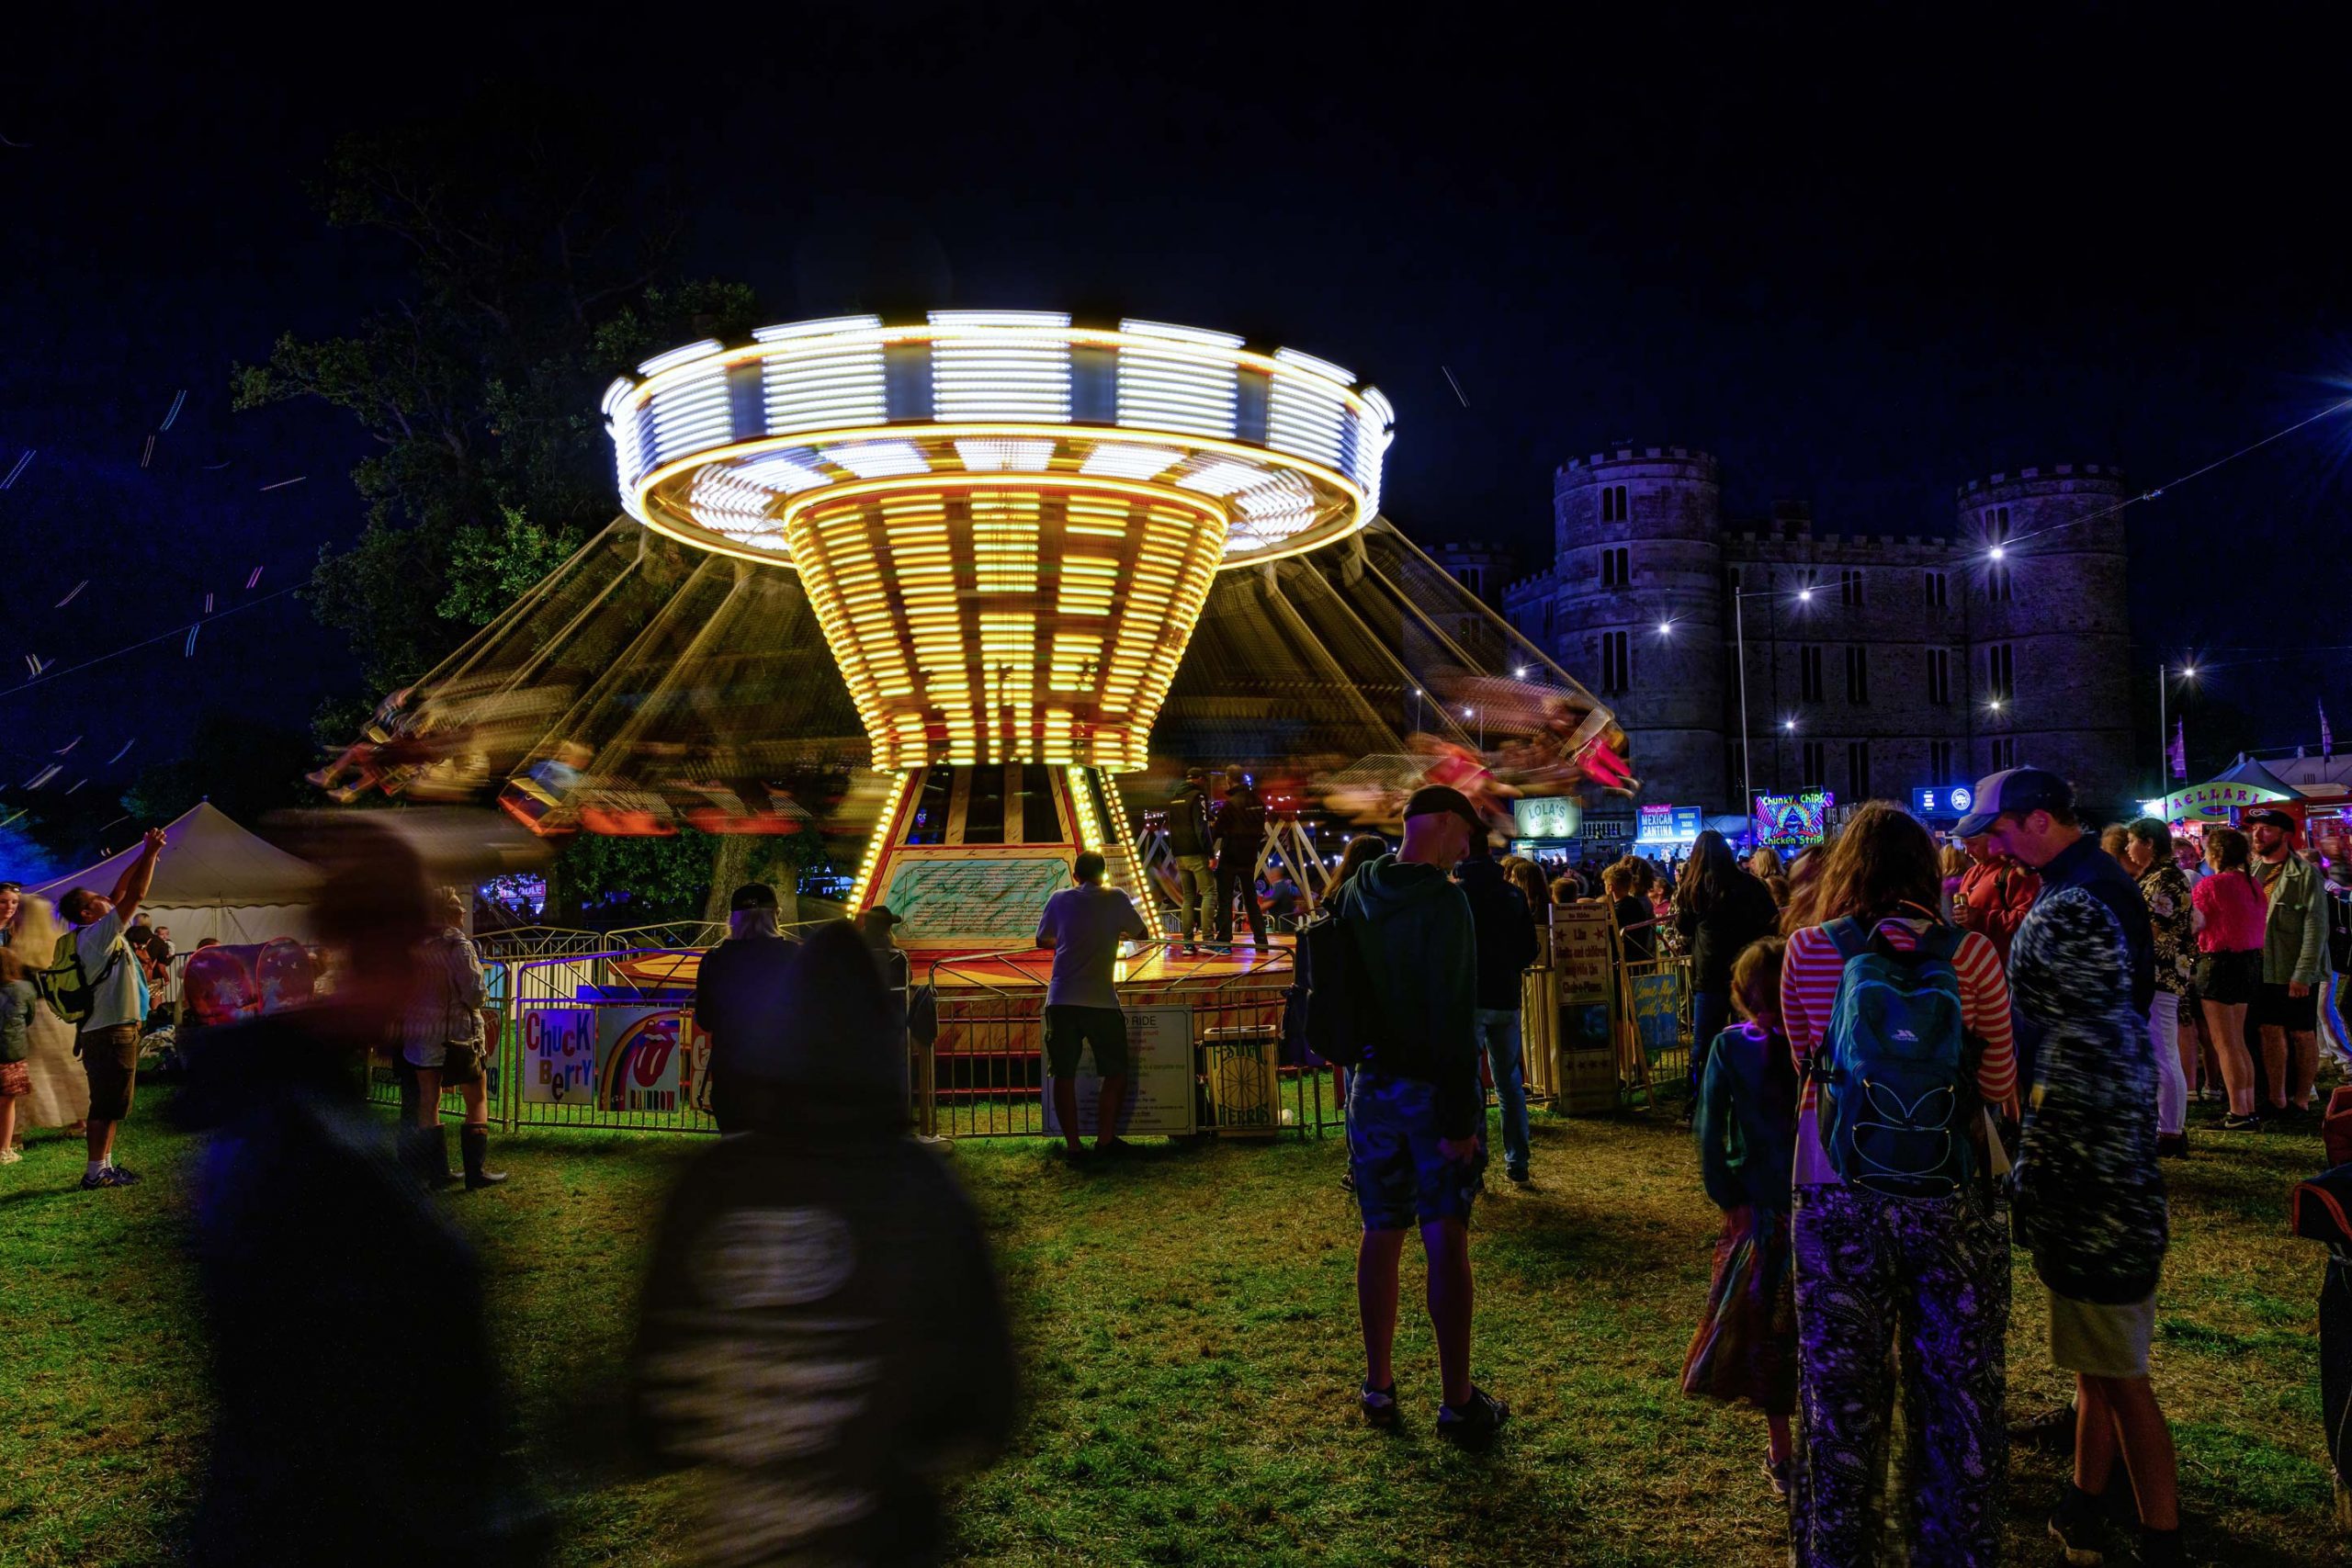 An electrifying scene captured by Wright Content at a festival, featuring party-goers enjoying the vibrant atmosphere. In the background, a fairground ride spins in the dark, illuminated by colorful lights. The slow shutter speed creates a mesmerizing effect, capturing the dynamic movement and light trails of the spinning swings. Wright Content specializes in documenting the excitement of nighttime events.